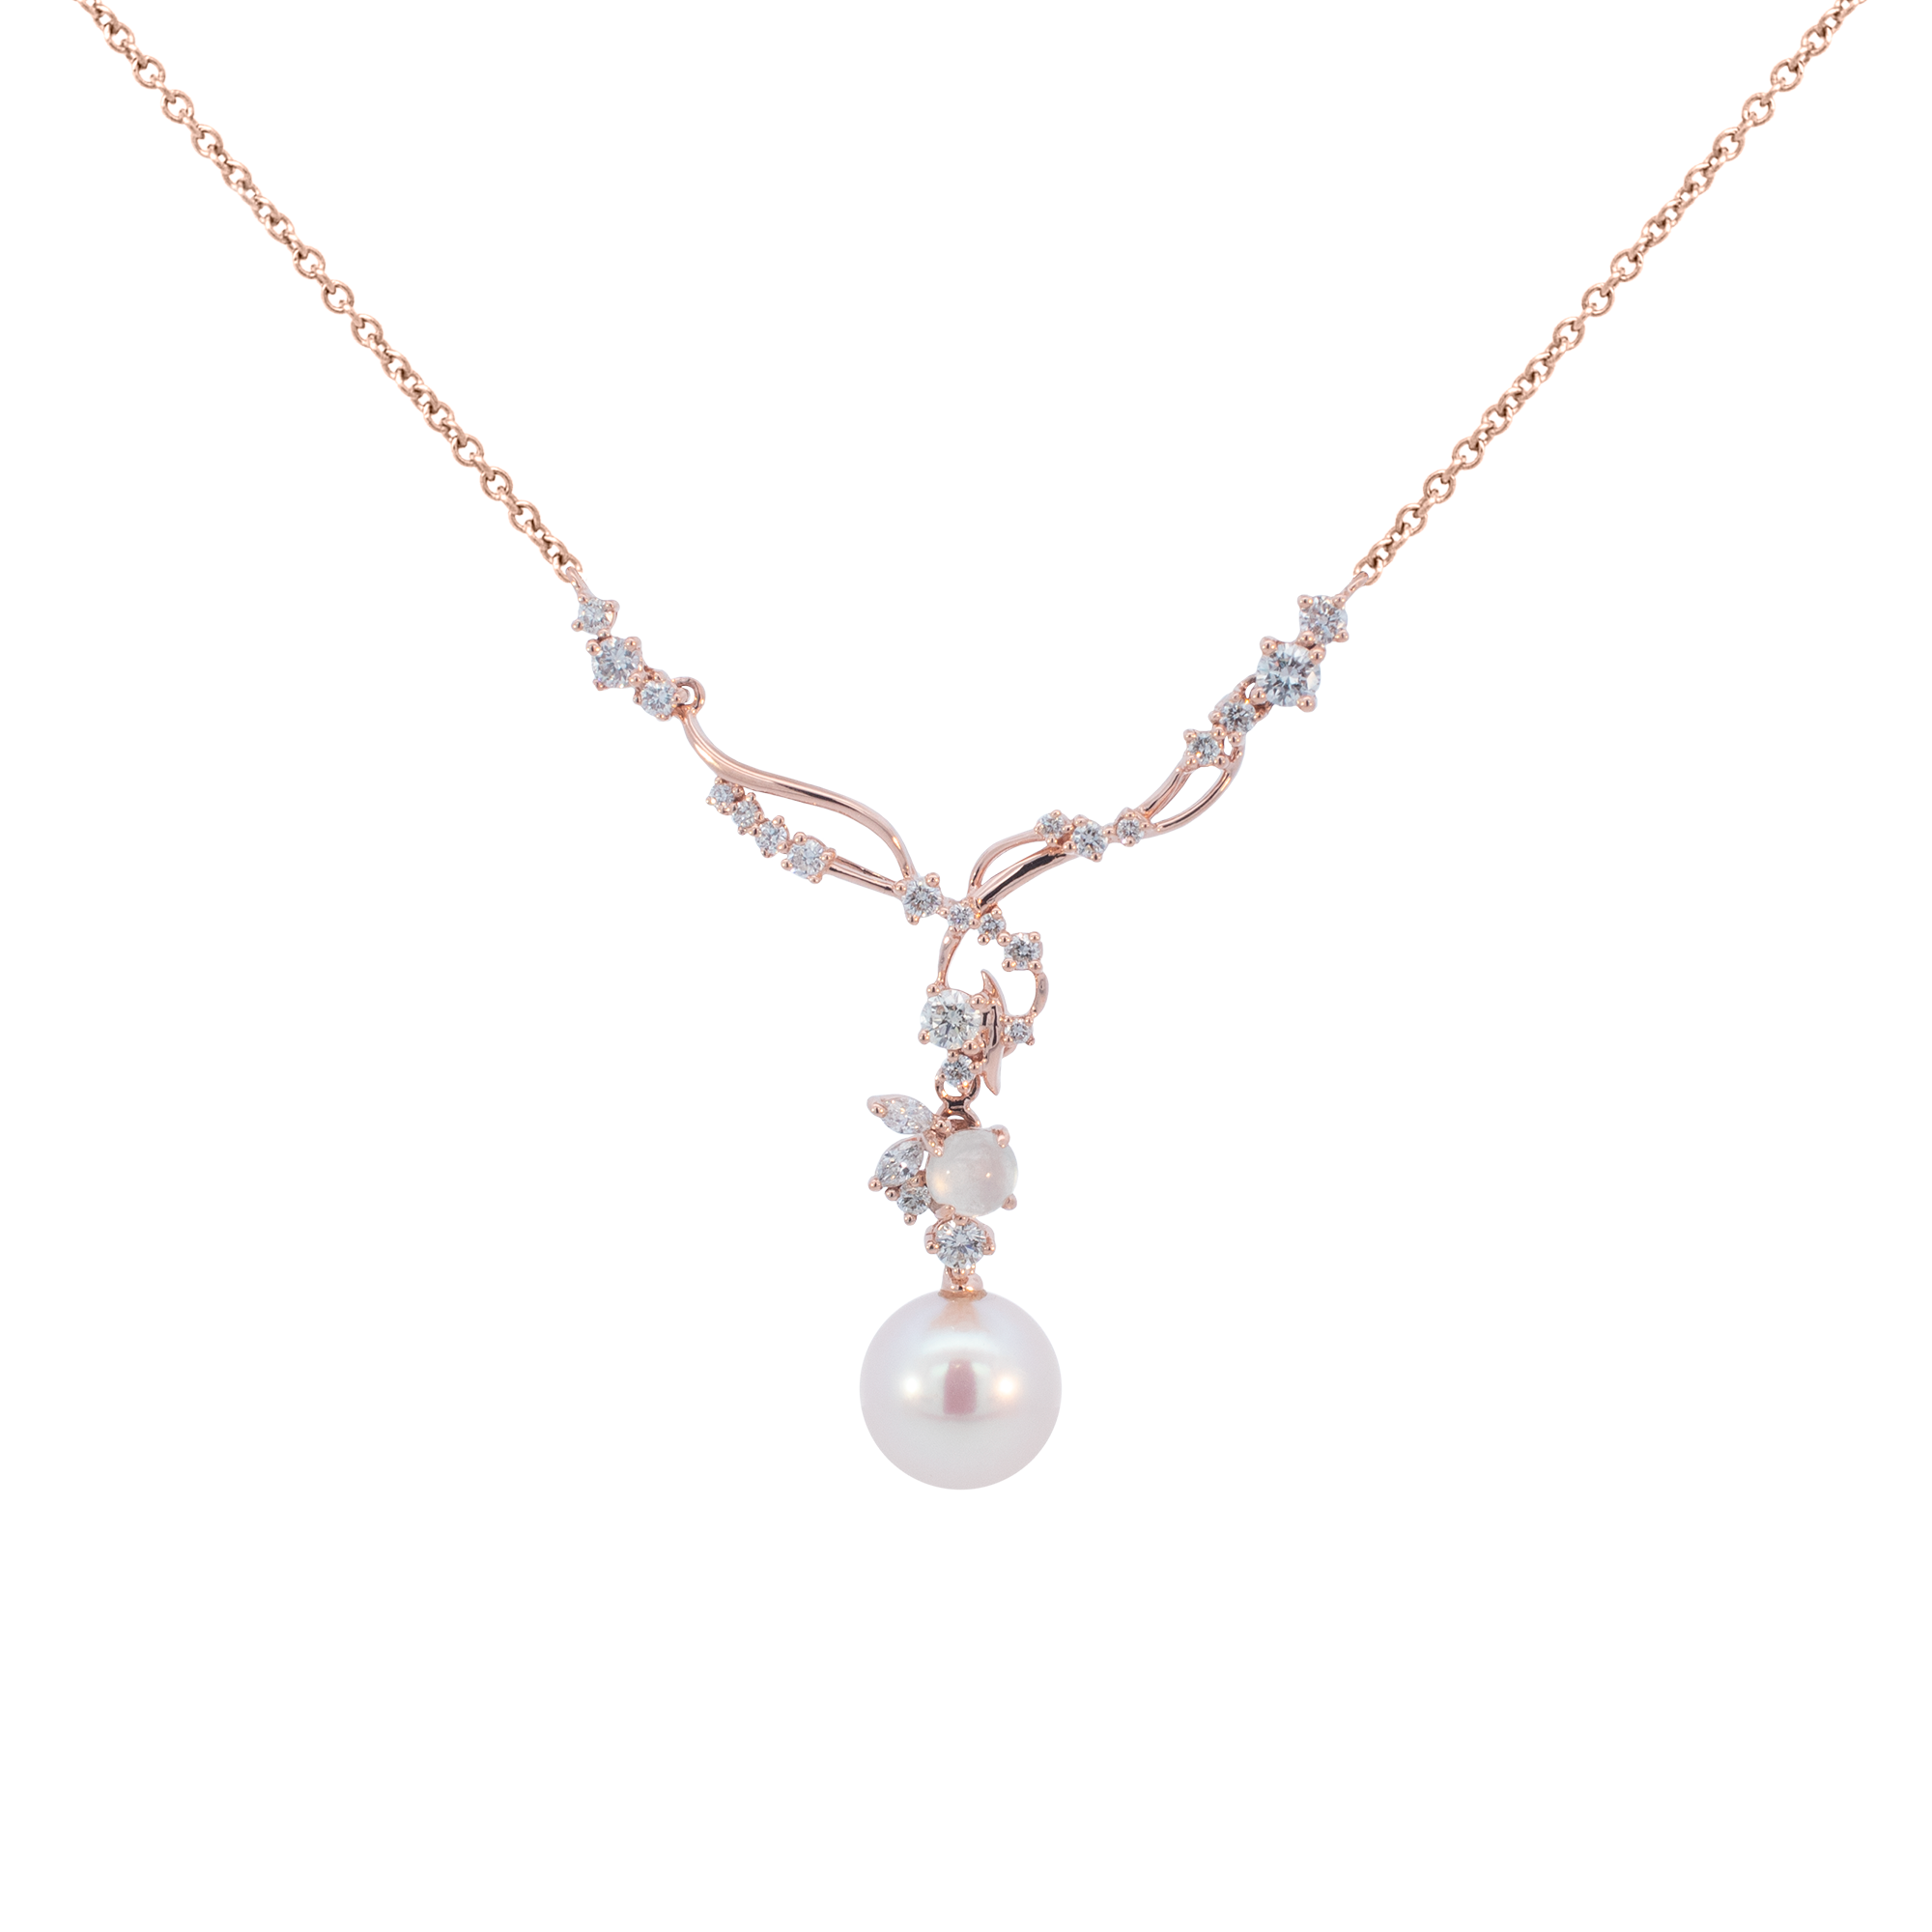 Ethereal Lutetia Paris Necklace in white background